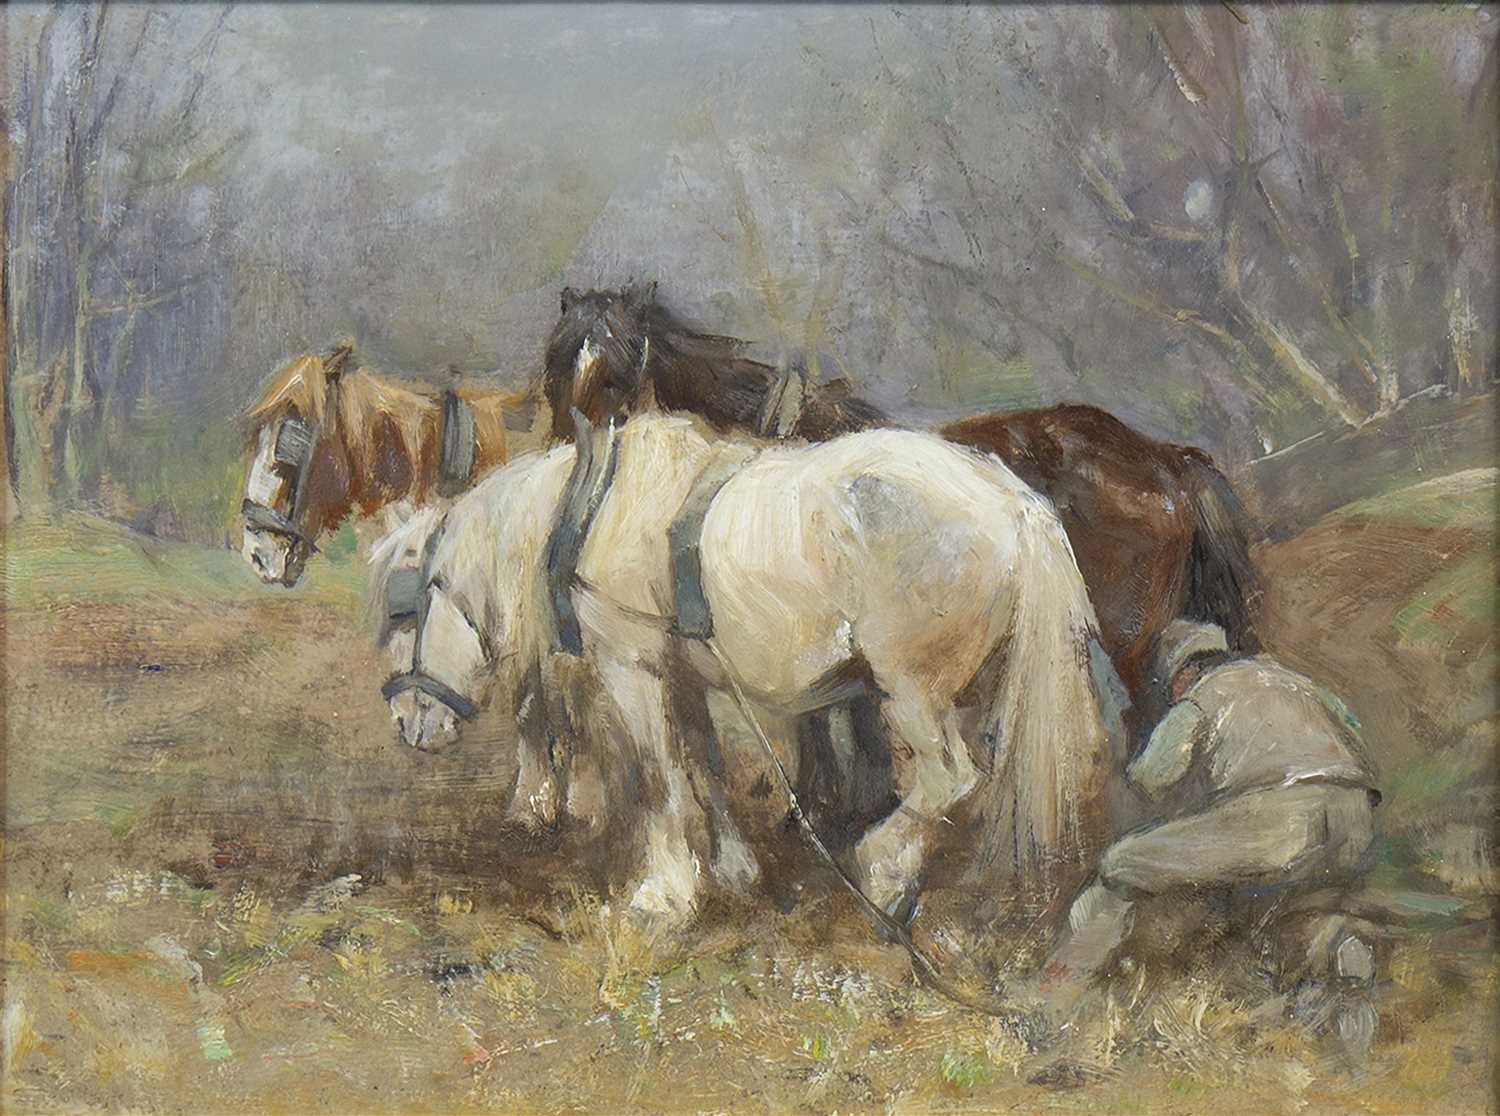 Lot 430 - HORSES IN A LANDSCAPE,  BY GEORGE SMITH RSA